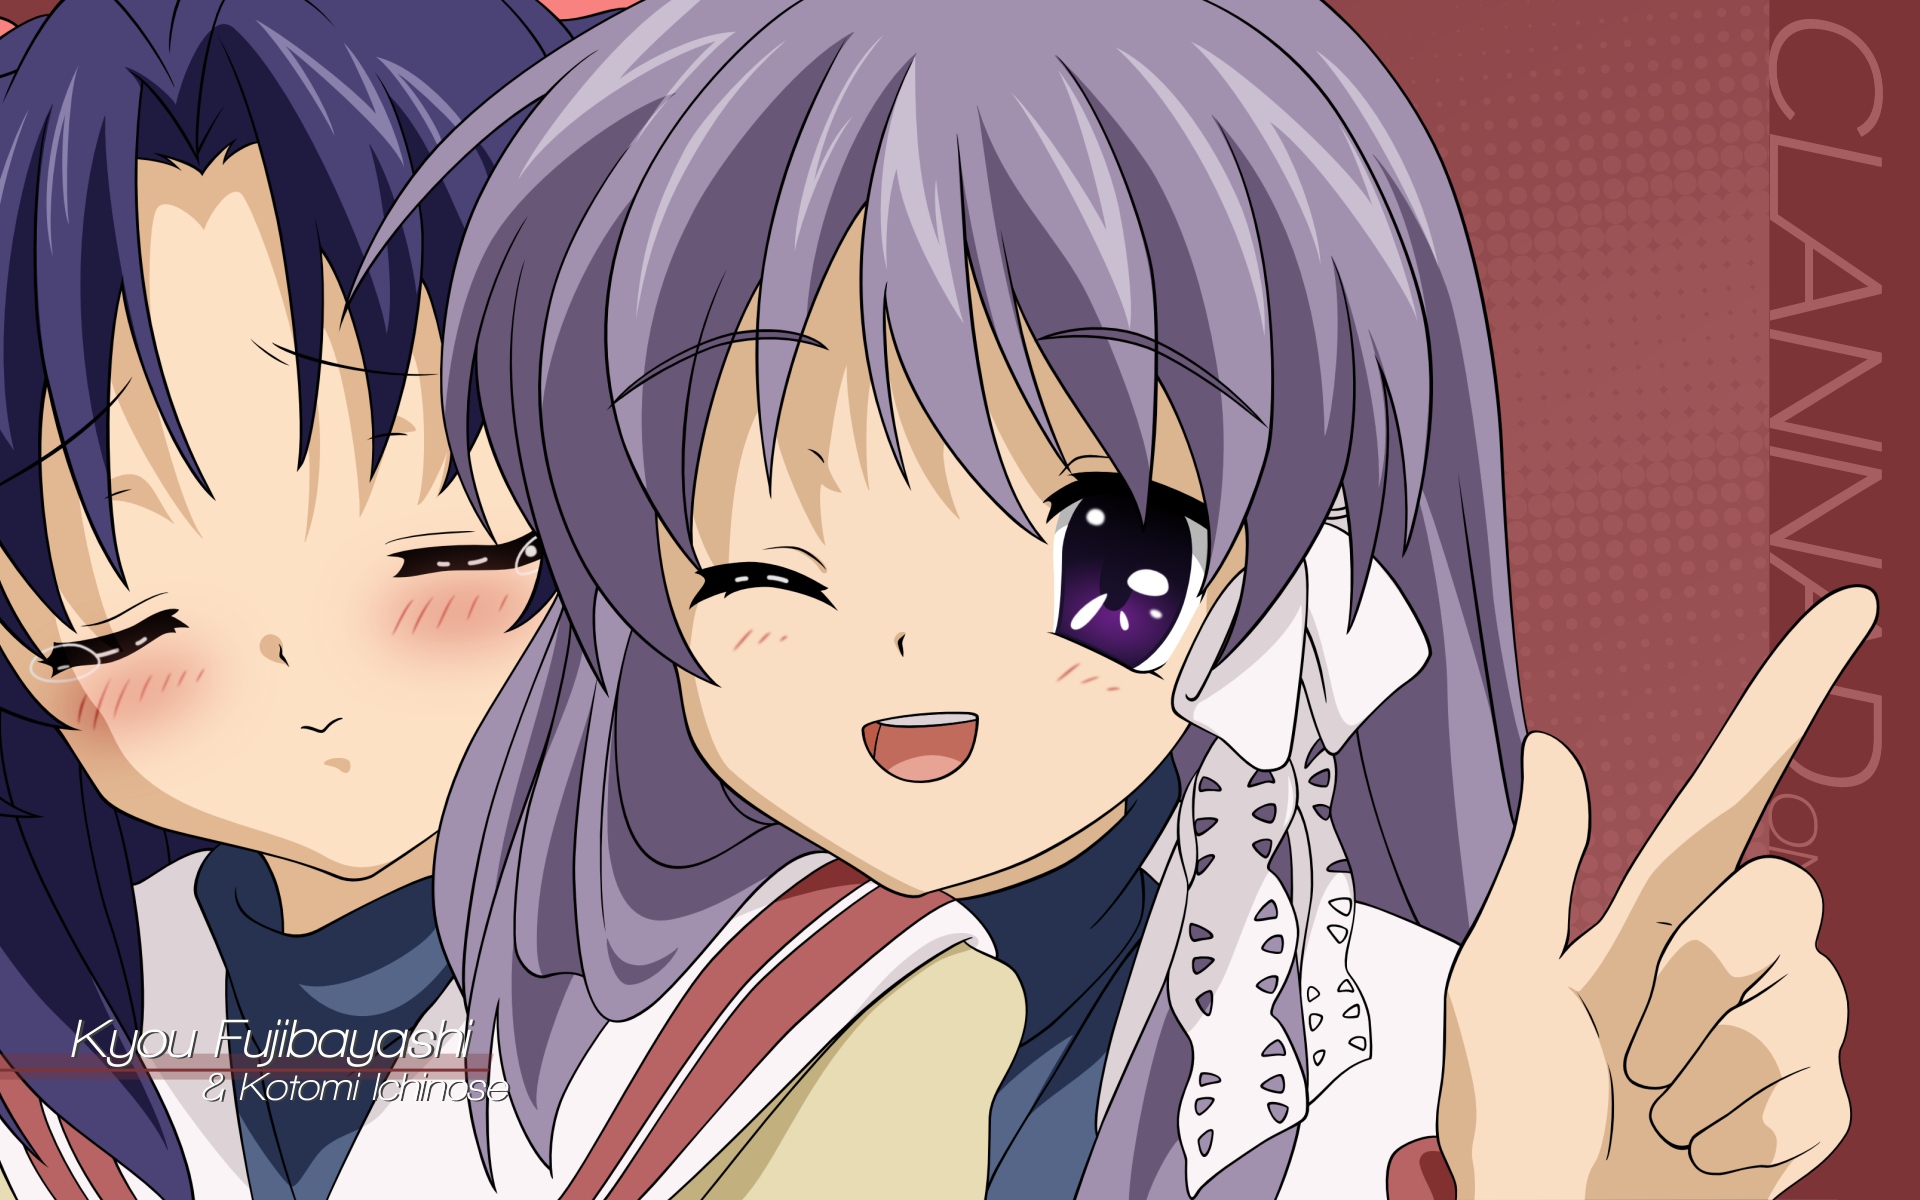 Anime characters Kyou Fujibayashi and Kotomi Ichinose from Clannad on a desktop wallpaper.